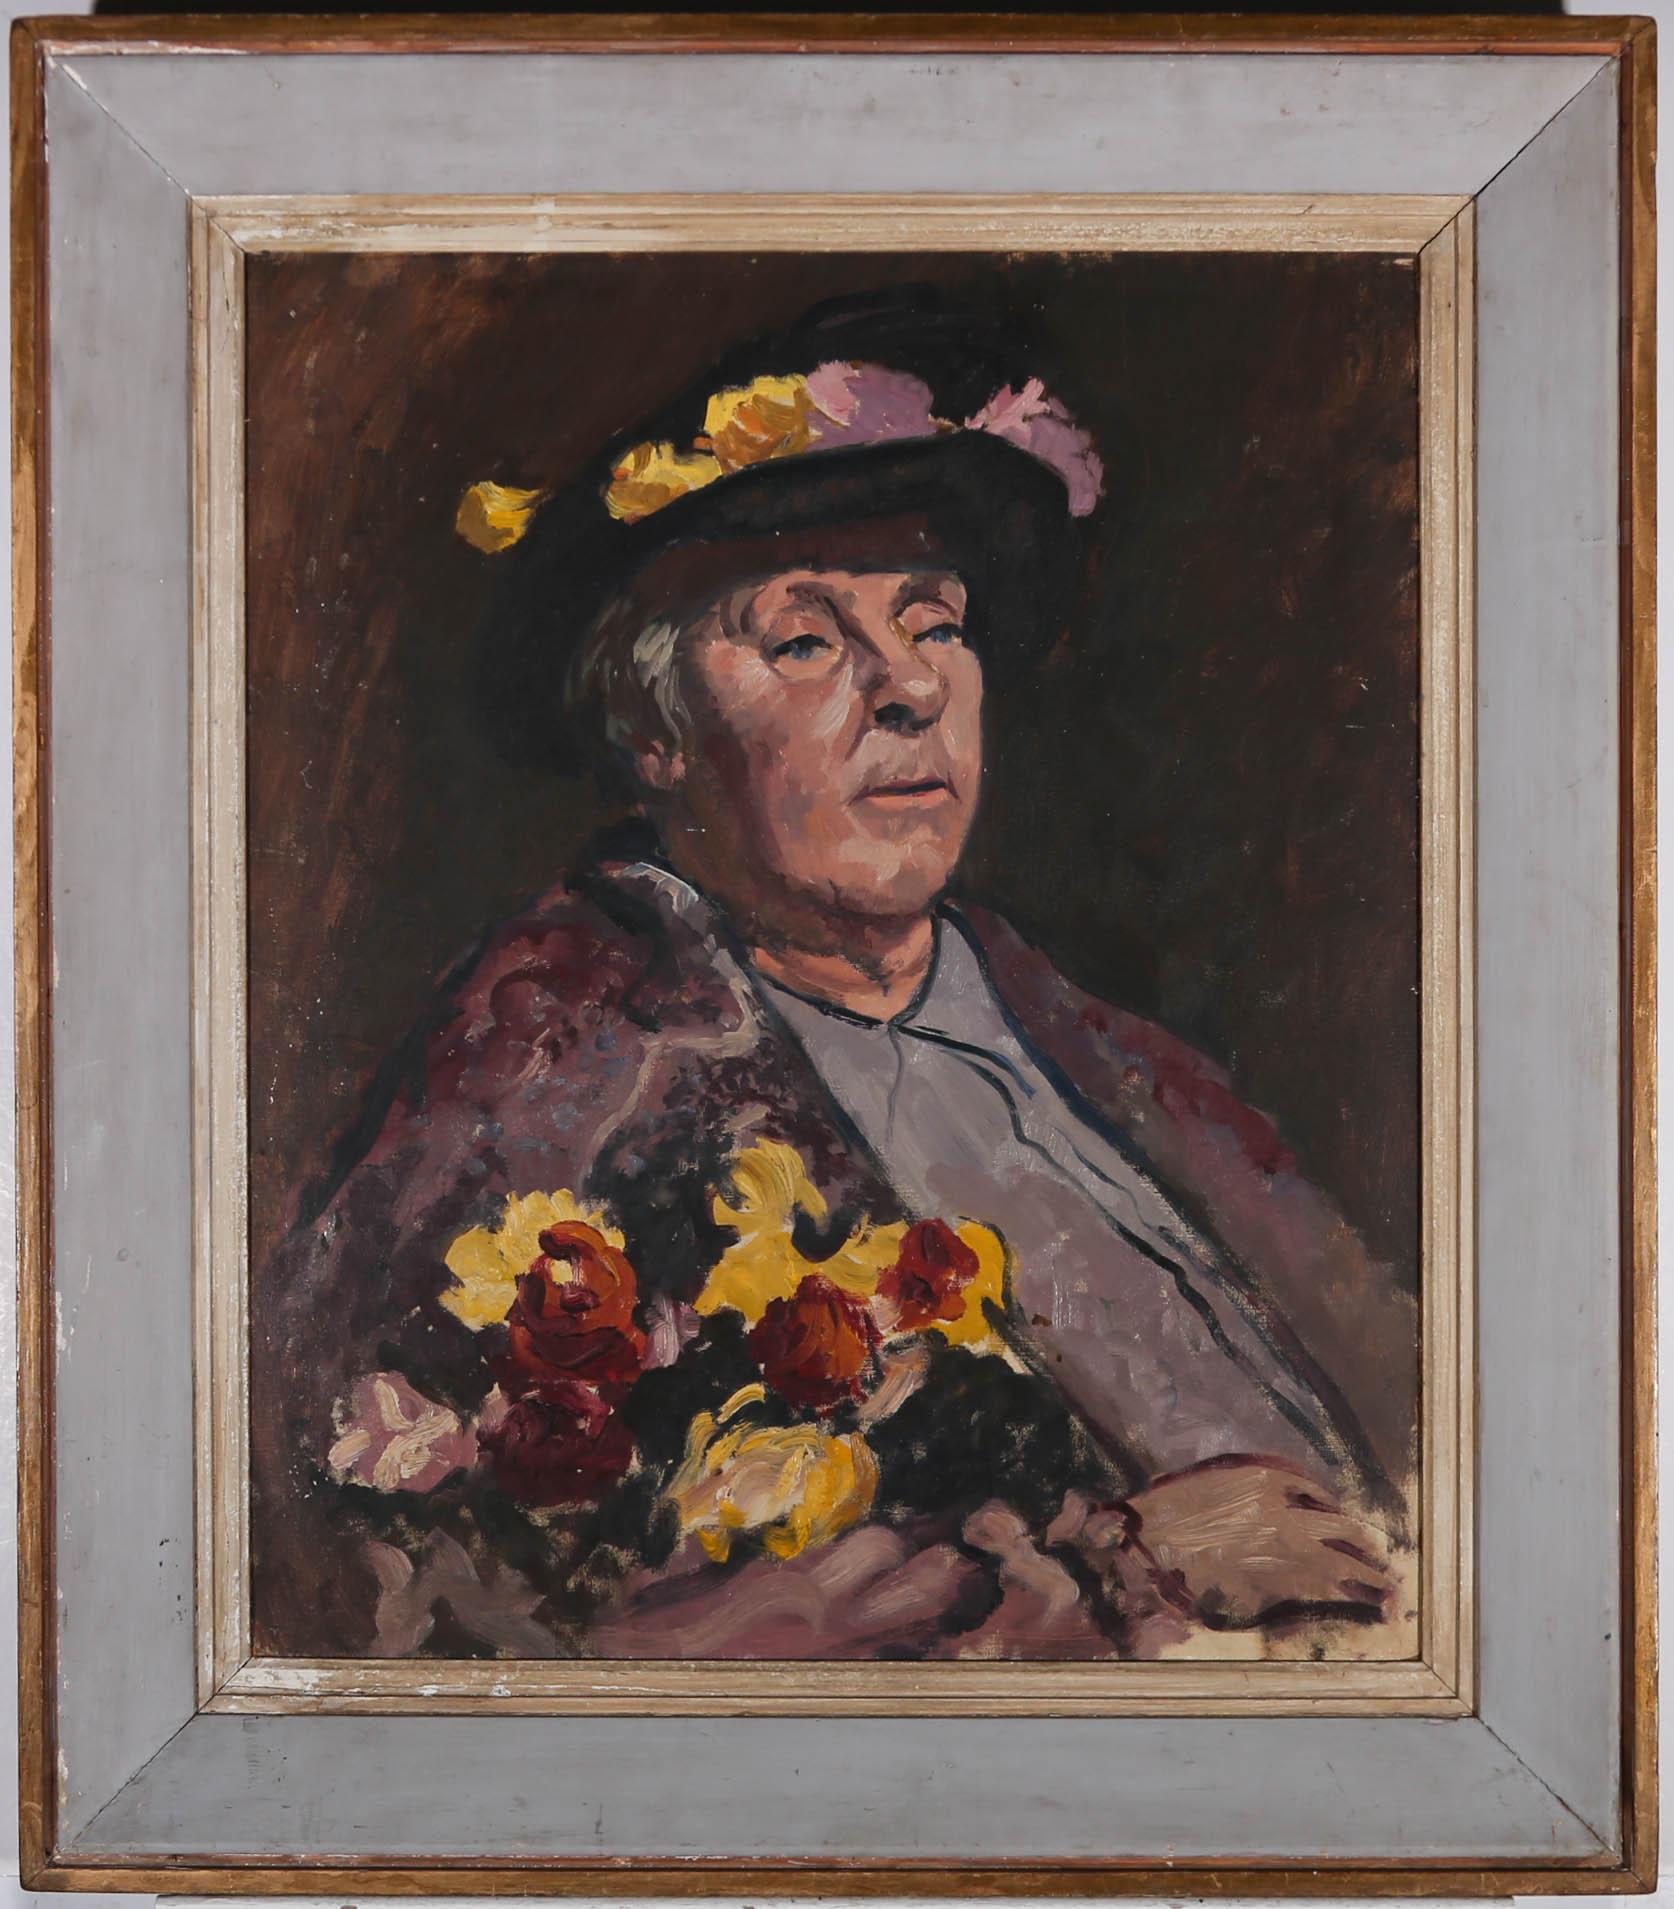 This delightful oil study depicts a flower feller clutching a bouquet in the crook of one arm. Her hat is adorned in yellow carnations and she wears a long purple coat. The artist captures the women in an impressionist style, using gestural